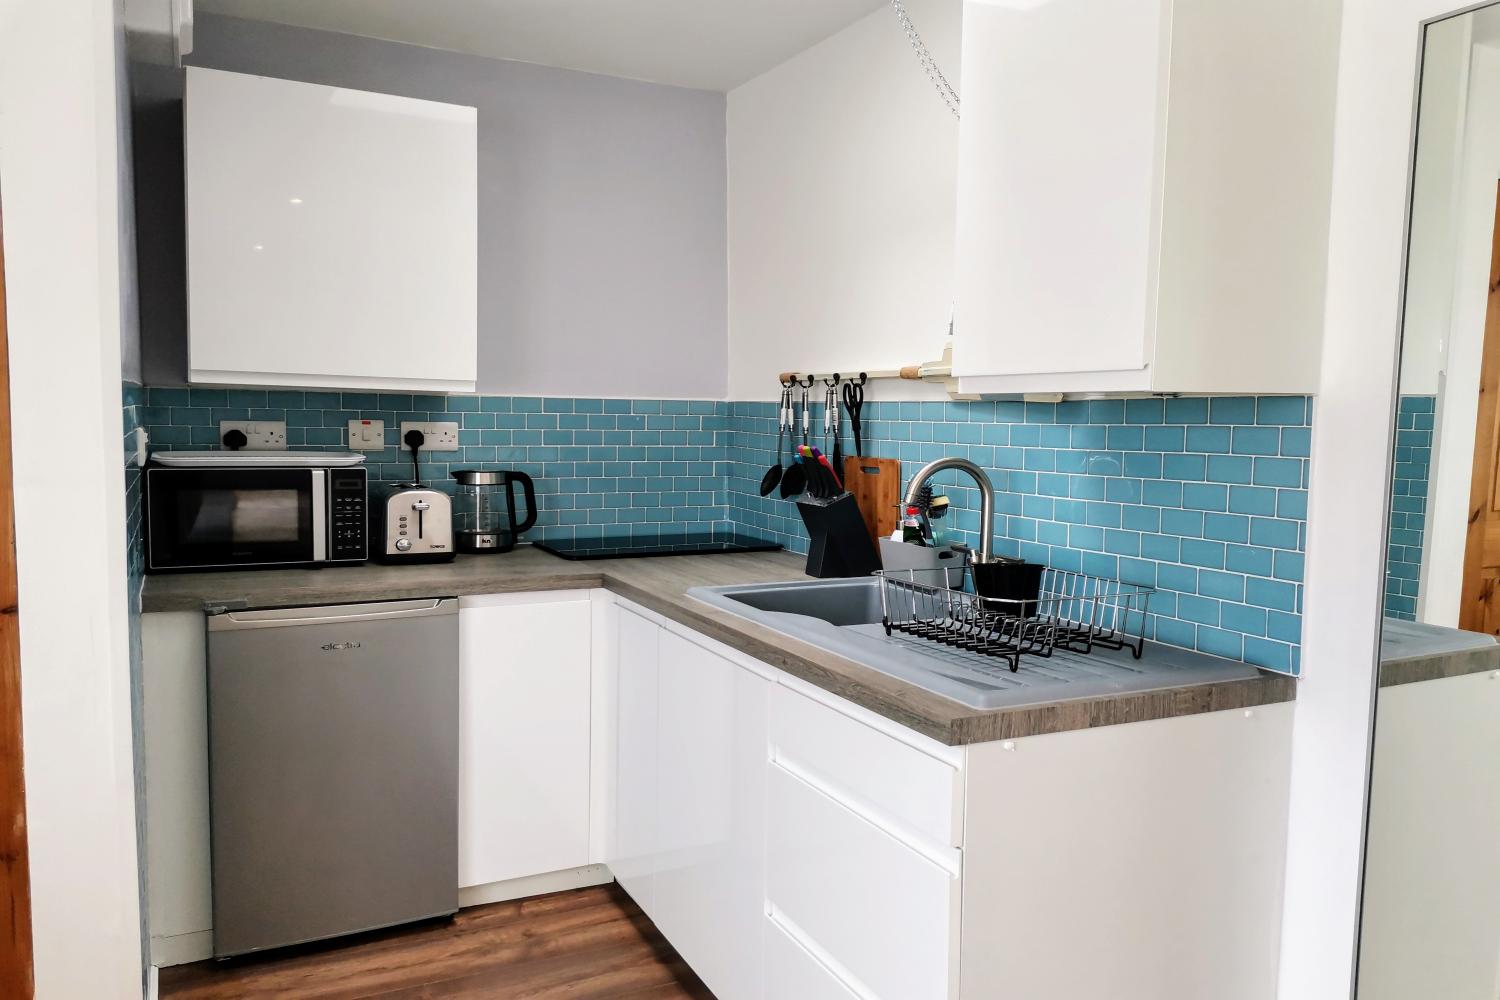 Well equipped kitchenette, 2 ring hob, kettle, toaster, microwave